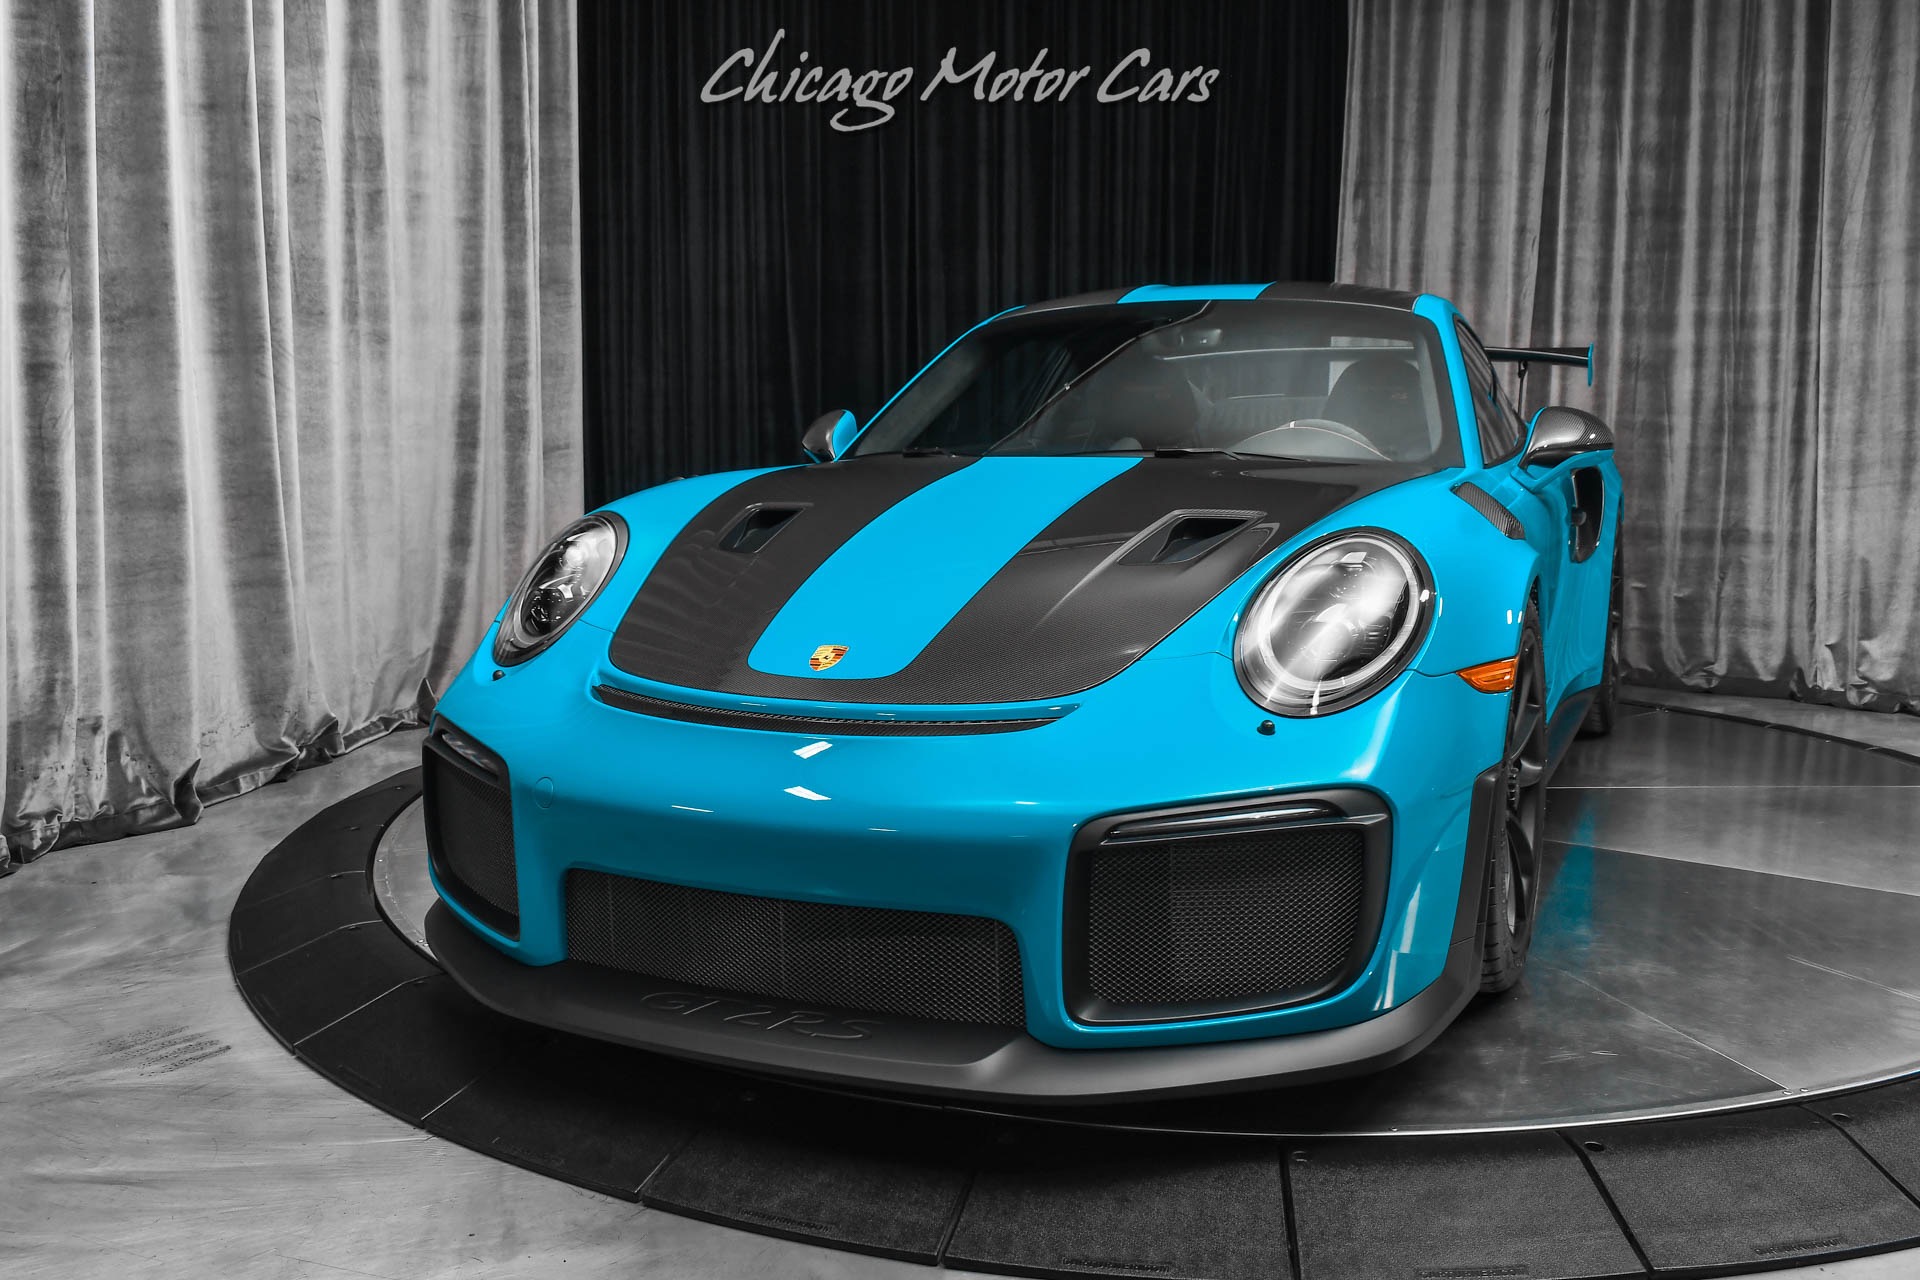 Used-2019-Porsche-911-GT2-RS-Weissach-Package-Lift-Miami-Blue-Only-4k-Miles-LOADED-MSRP-382295